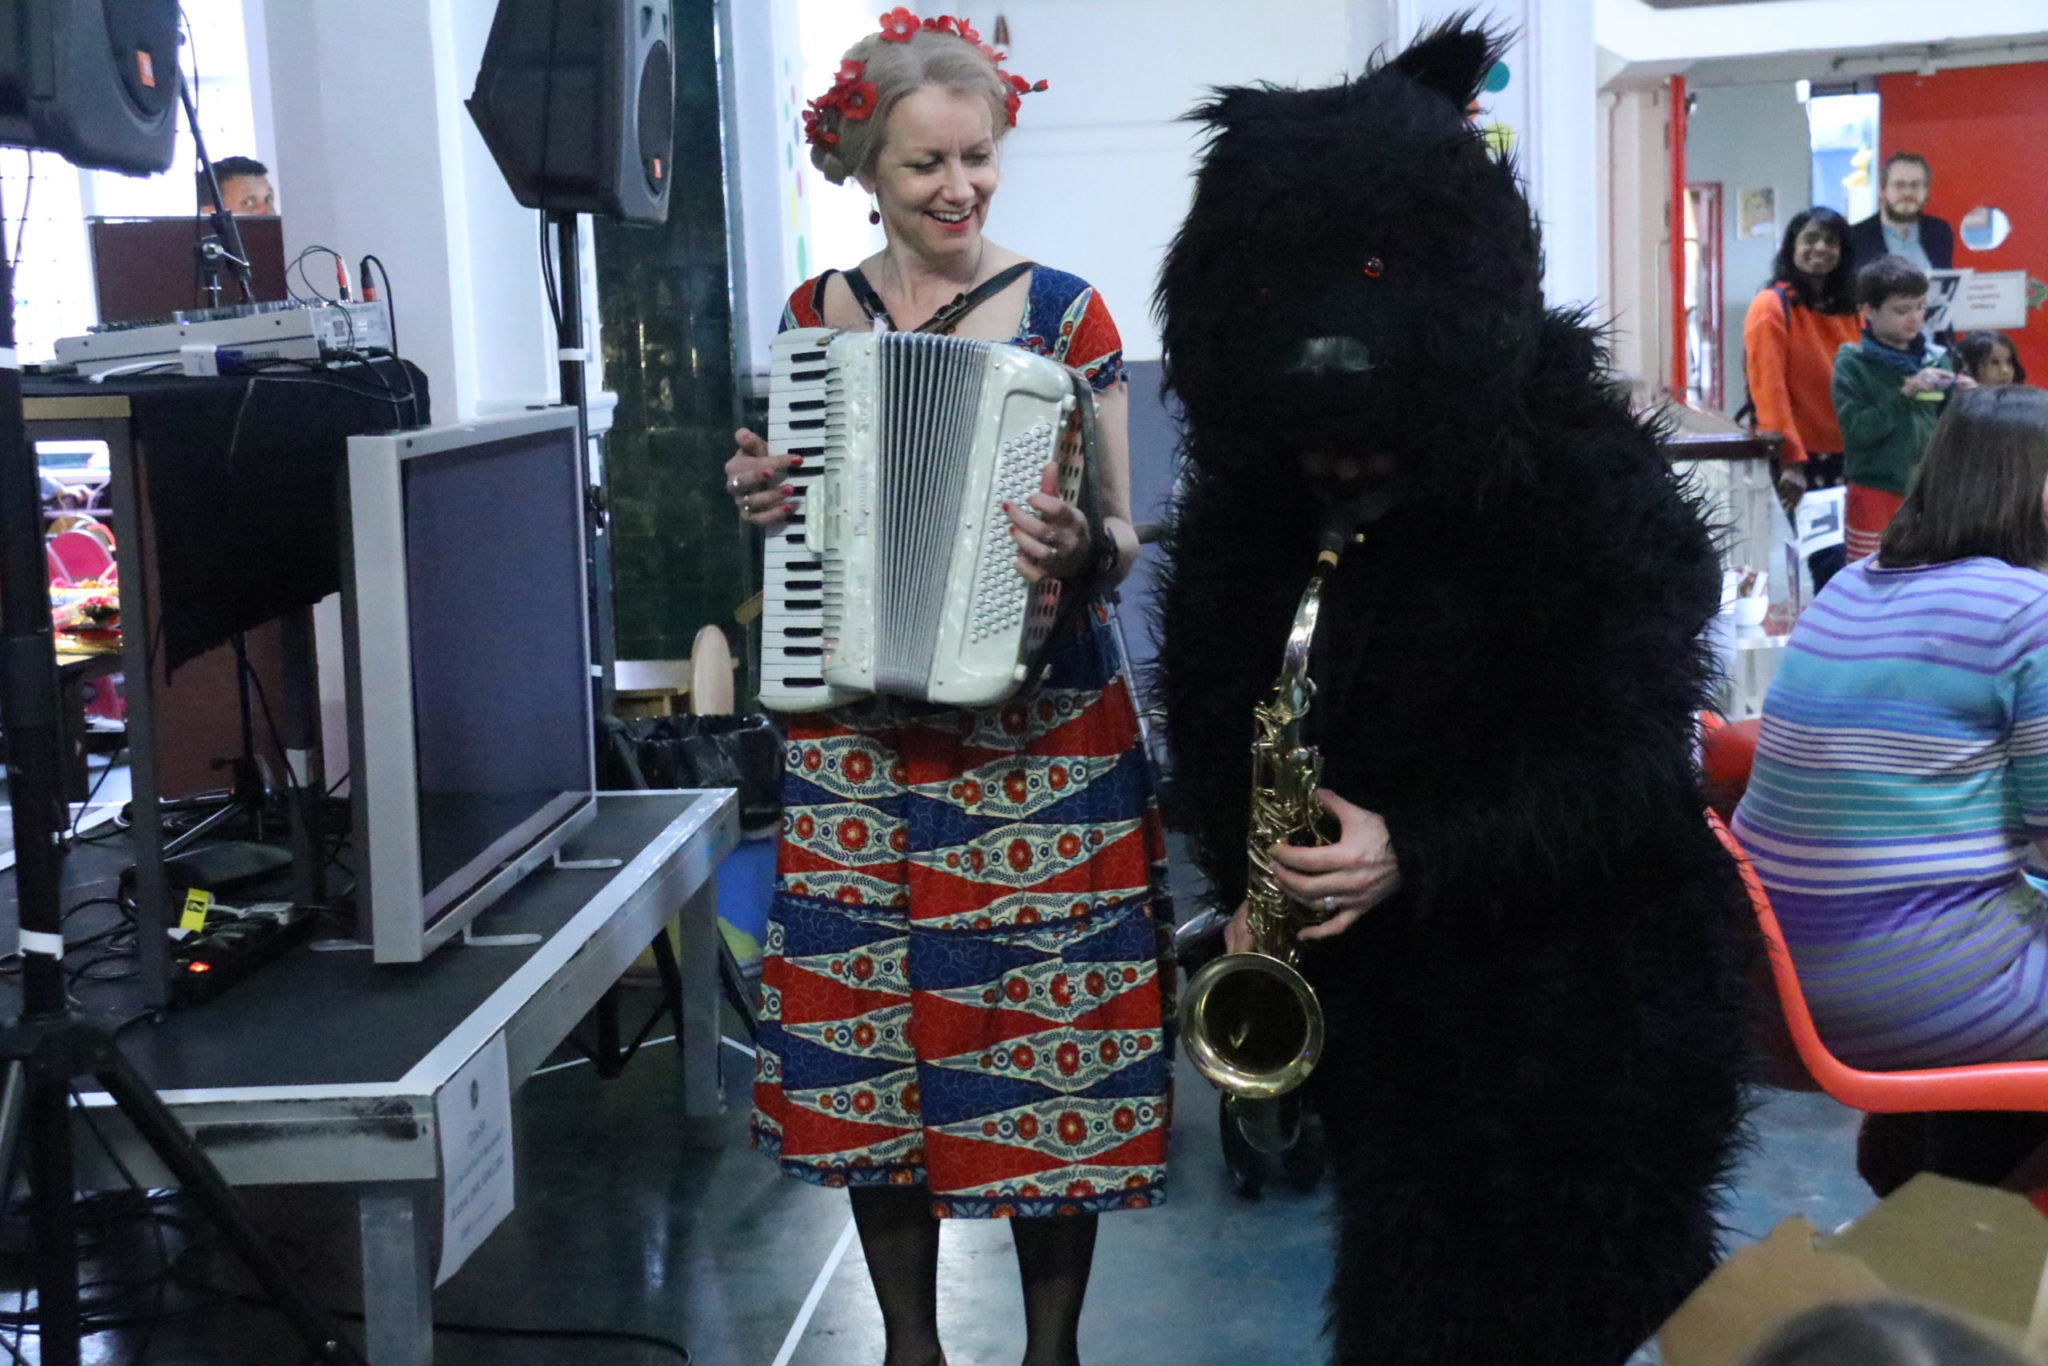 performance: Delpha with accordion next to a man dressed as a bear